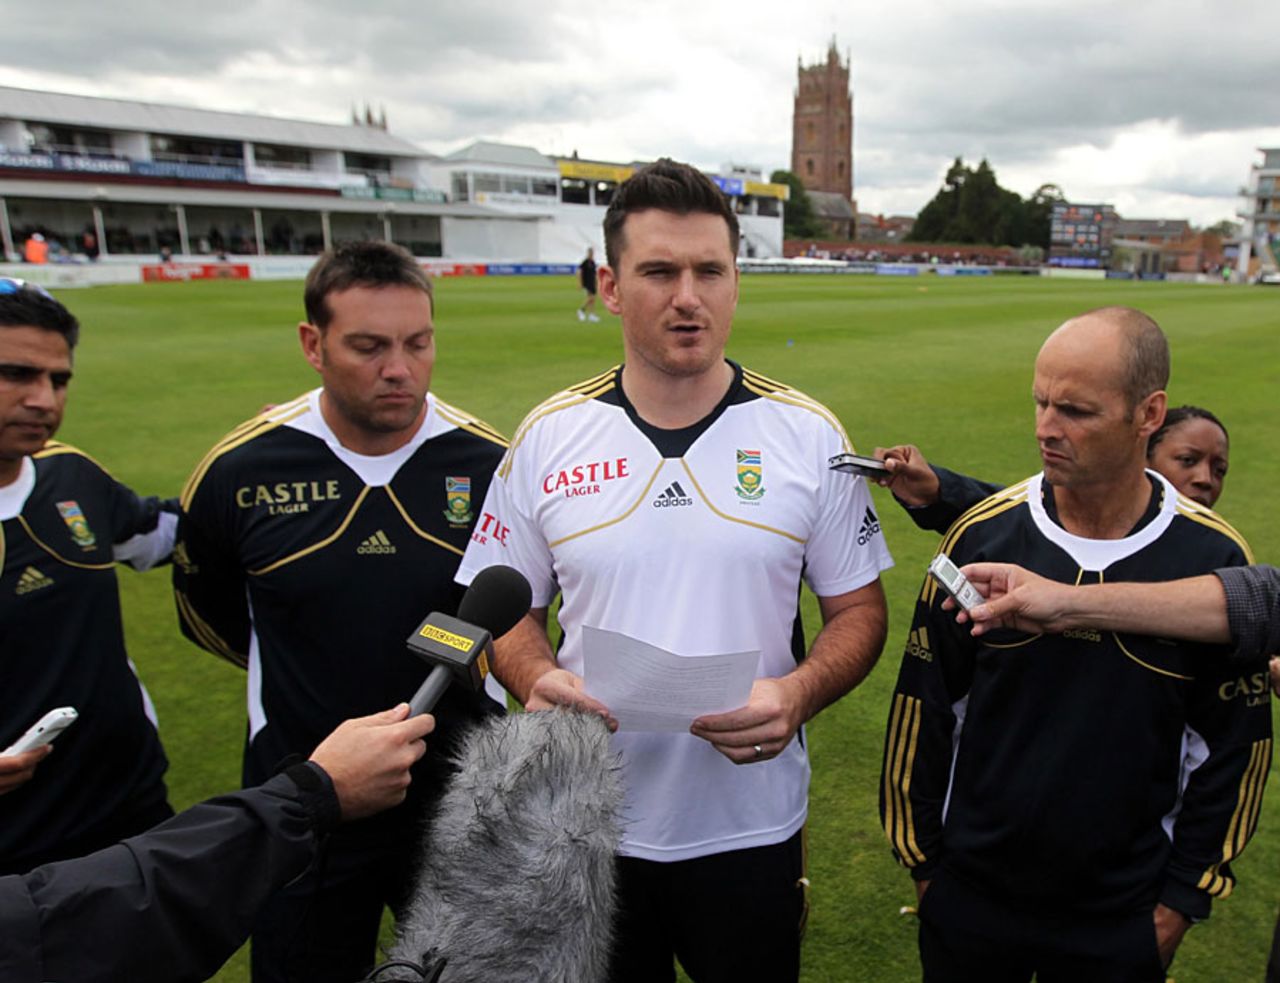 The South Africa squad addressed the media at Taunton, Somerset v South Africans, Tour match, Taunton, 2nd day, July 10, 2012